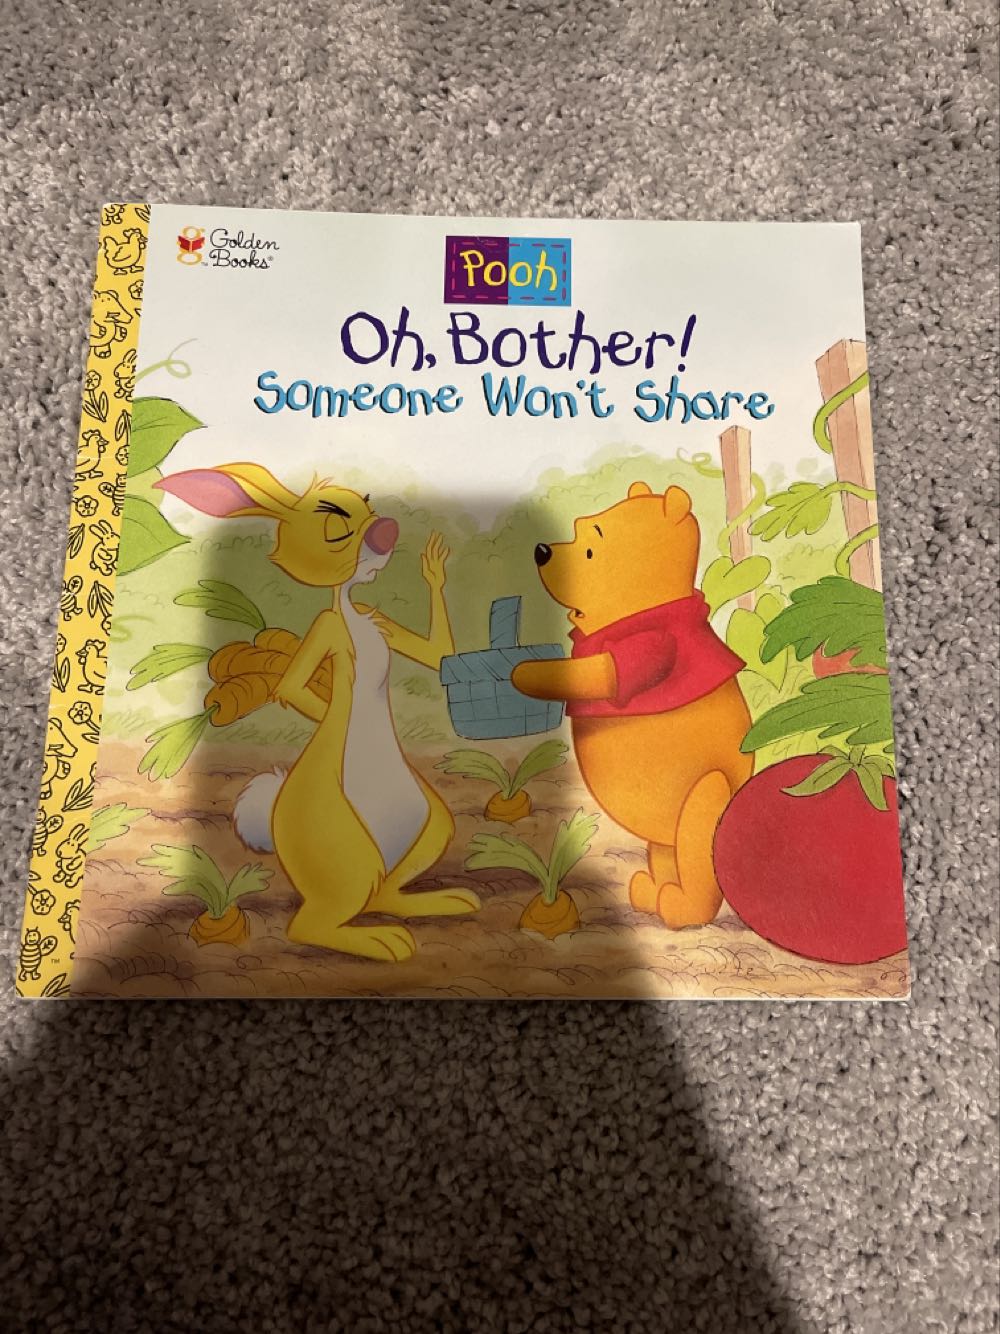 Disney Winnie-The-Pooh Oh Bother Someone Won’t Share! - Betty Birney (A Golden Book - Paperback) book collectible [Barcode 9780307127662] - Main Image 2